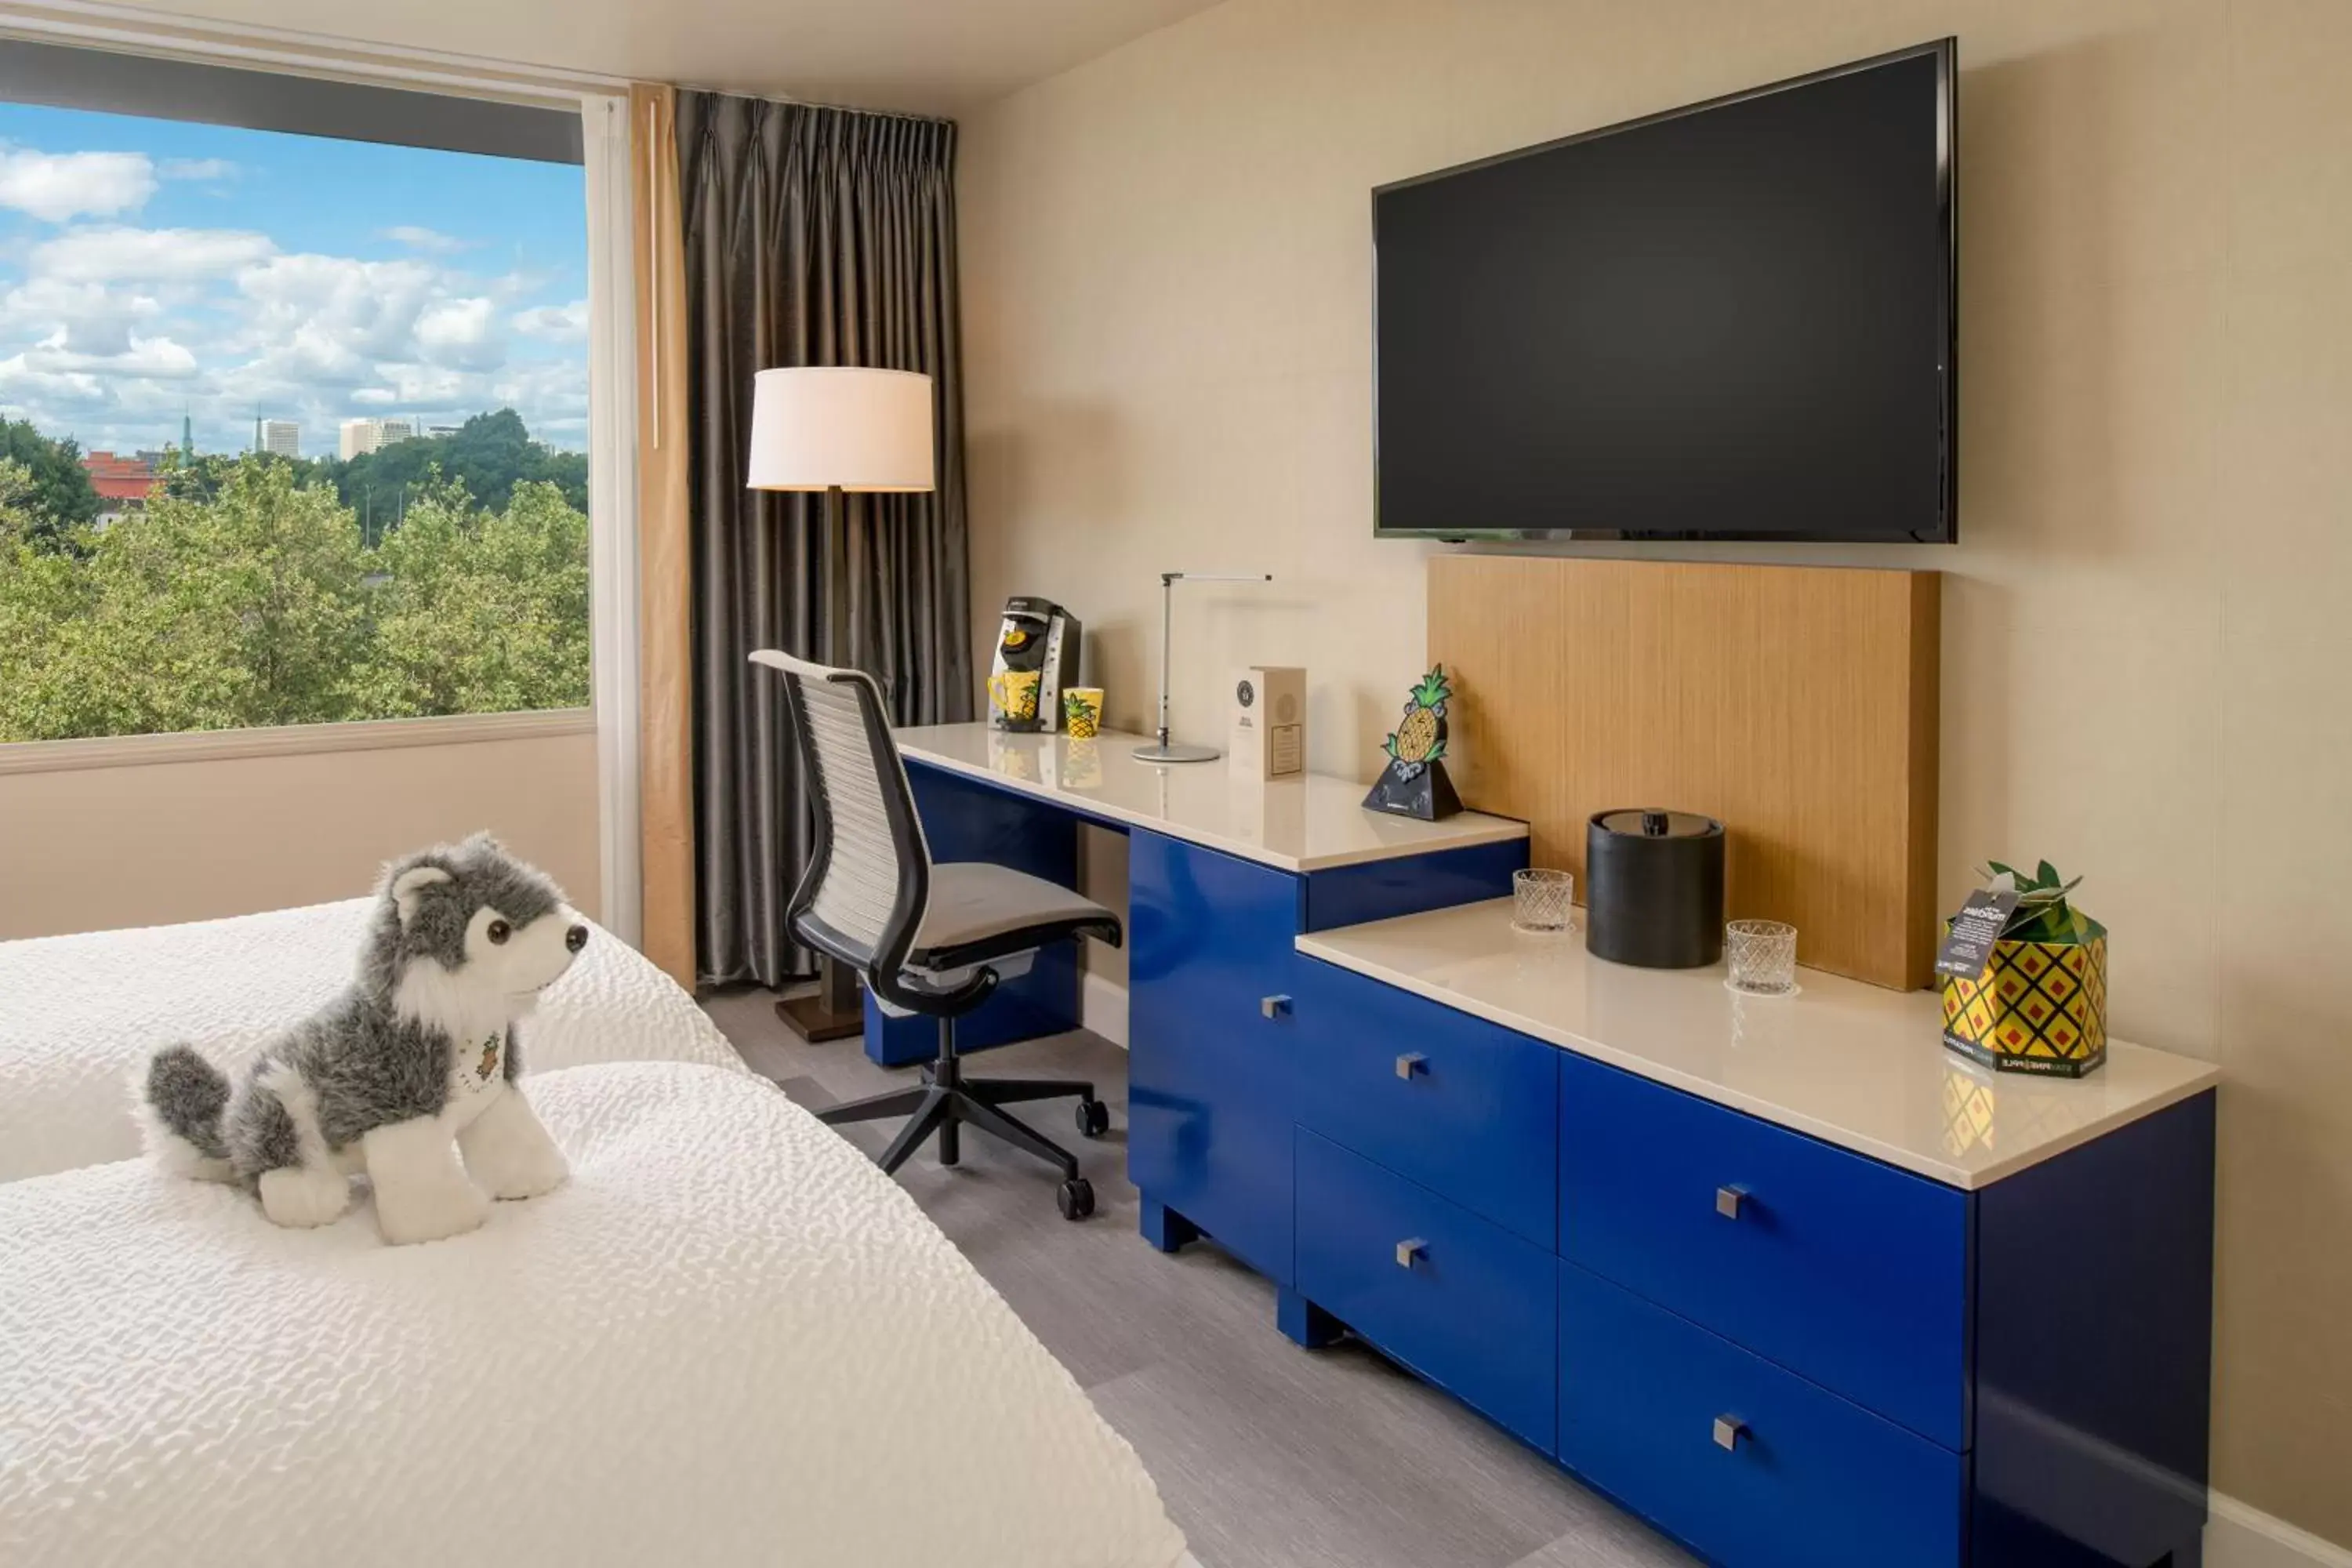 TV and multimedia, Pets in Staypineapple, Hotel Rose, Downtown Portland